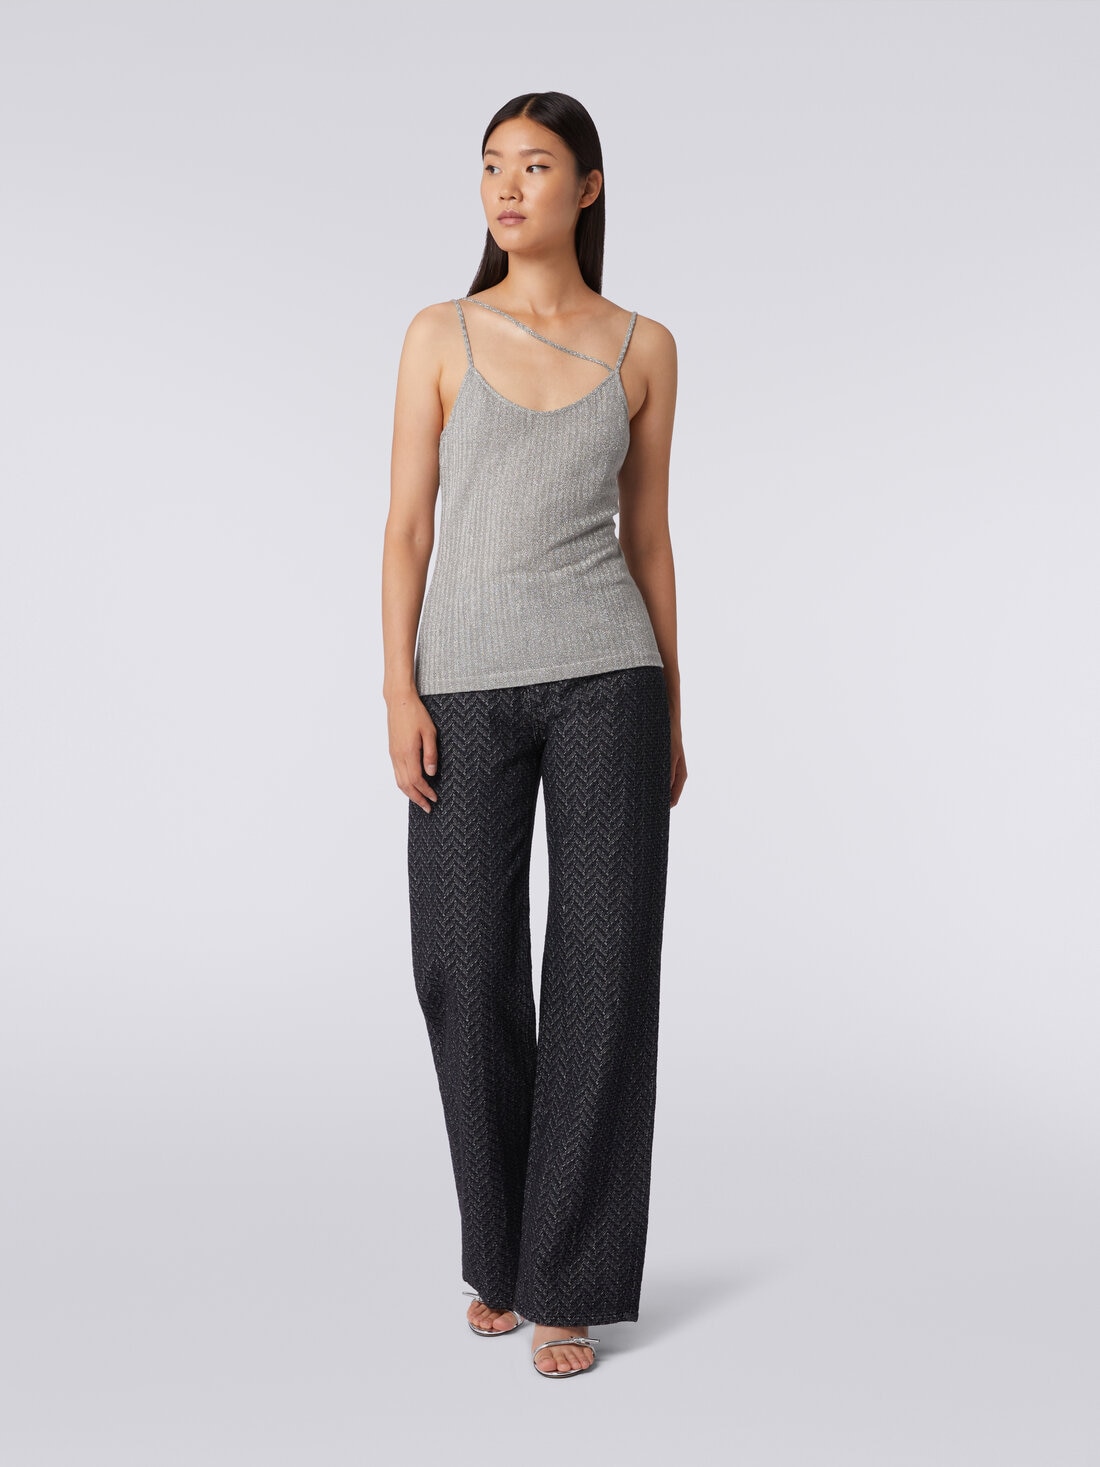 Cotton and viscose lamé tank top, Grey - DS23WK25BR00WNS91IT - 1